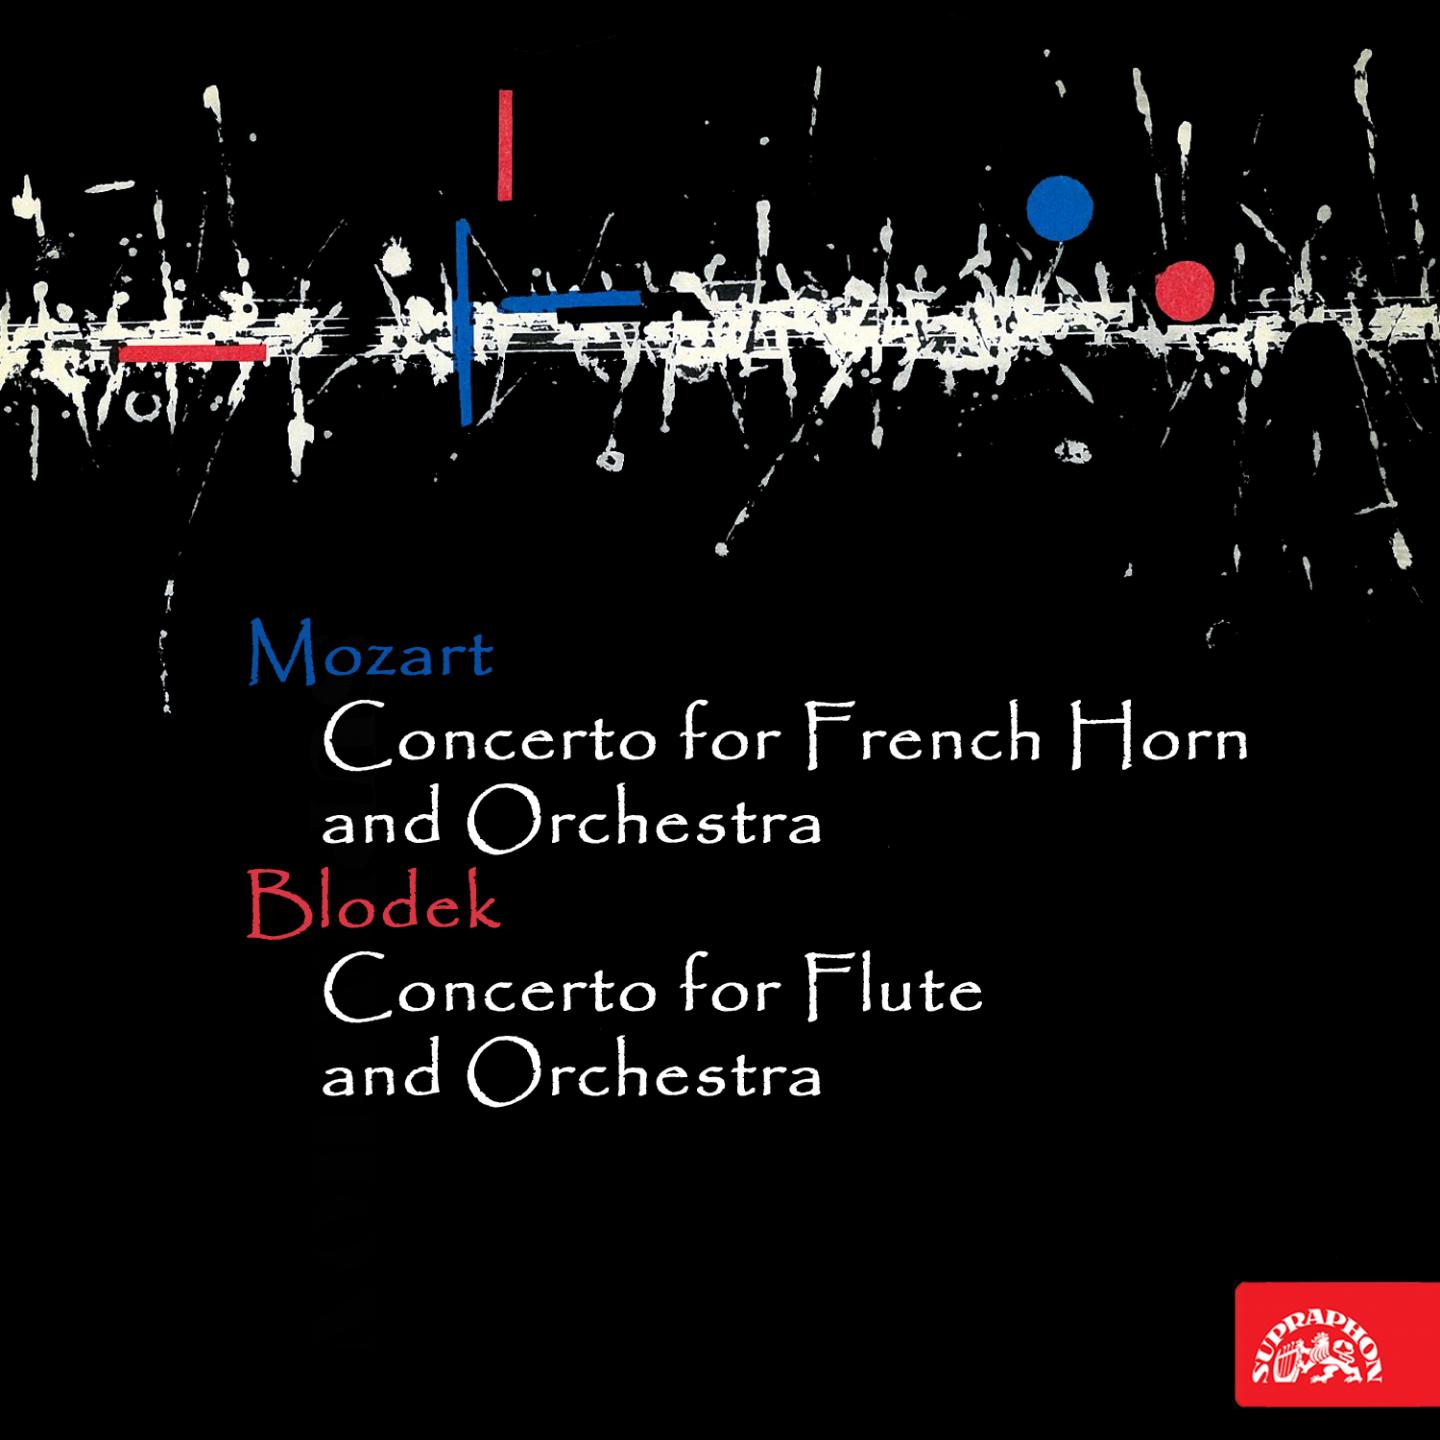 Concerto No. 2 for French Horn and Orchestra in E-Flat Major, .: I. Allegro maestoso